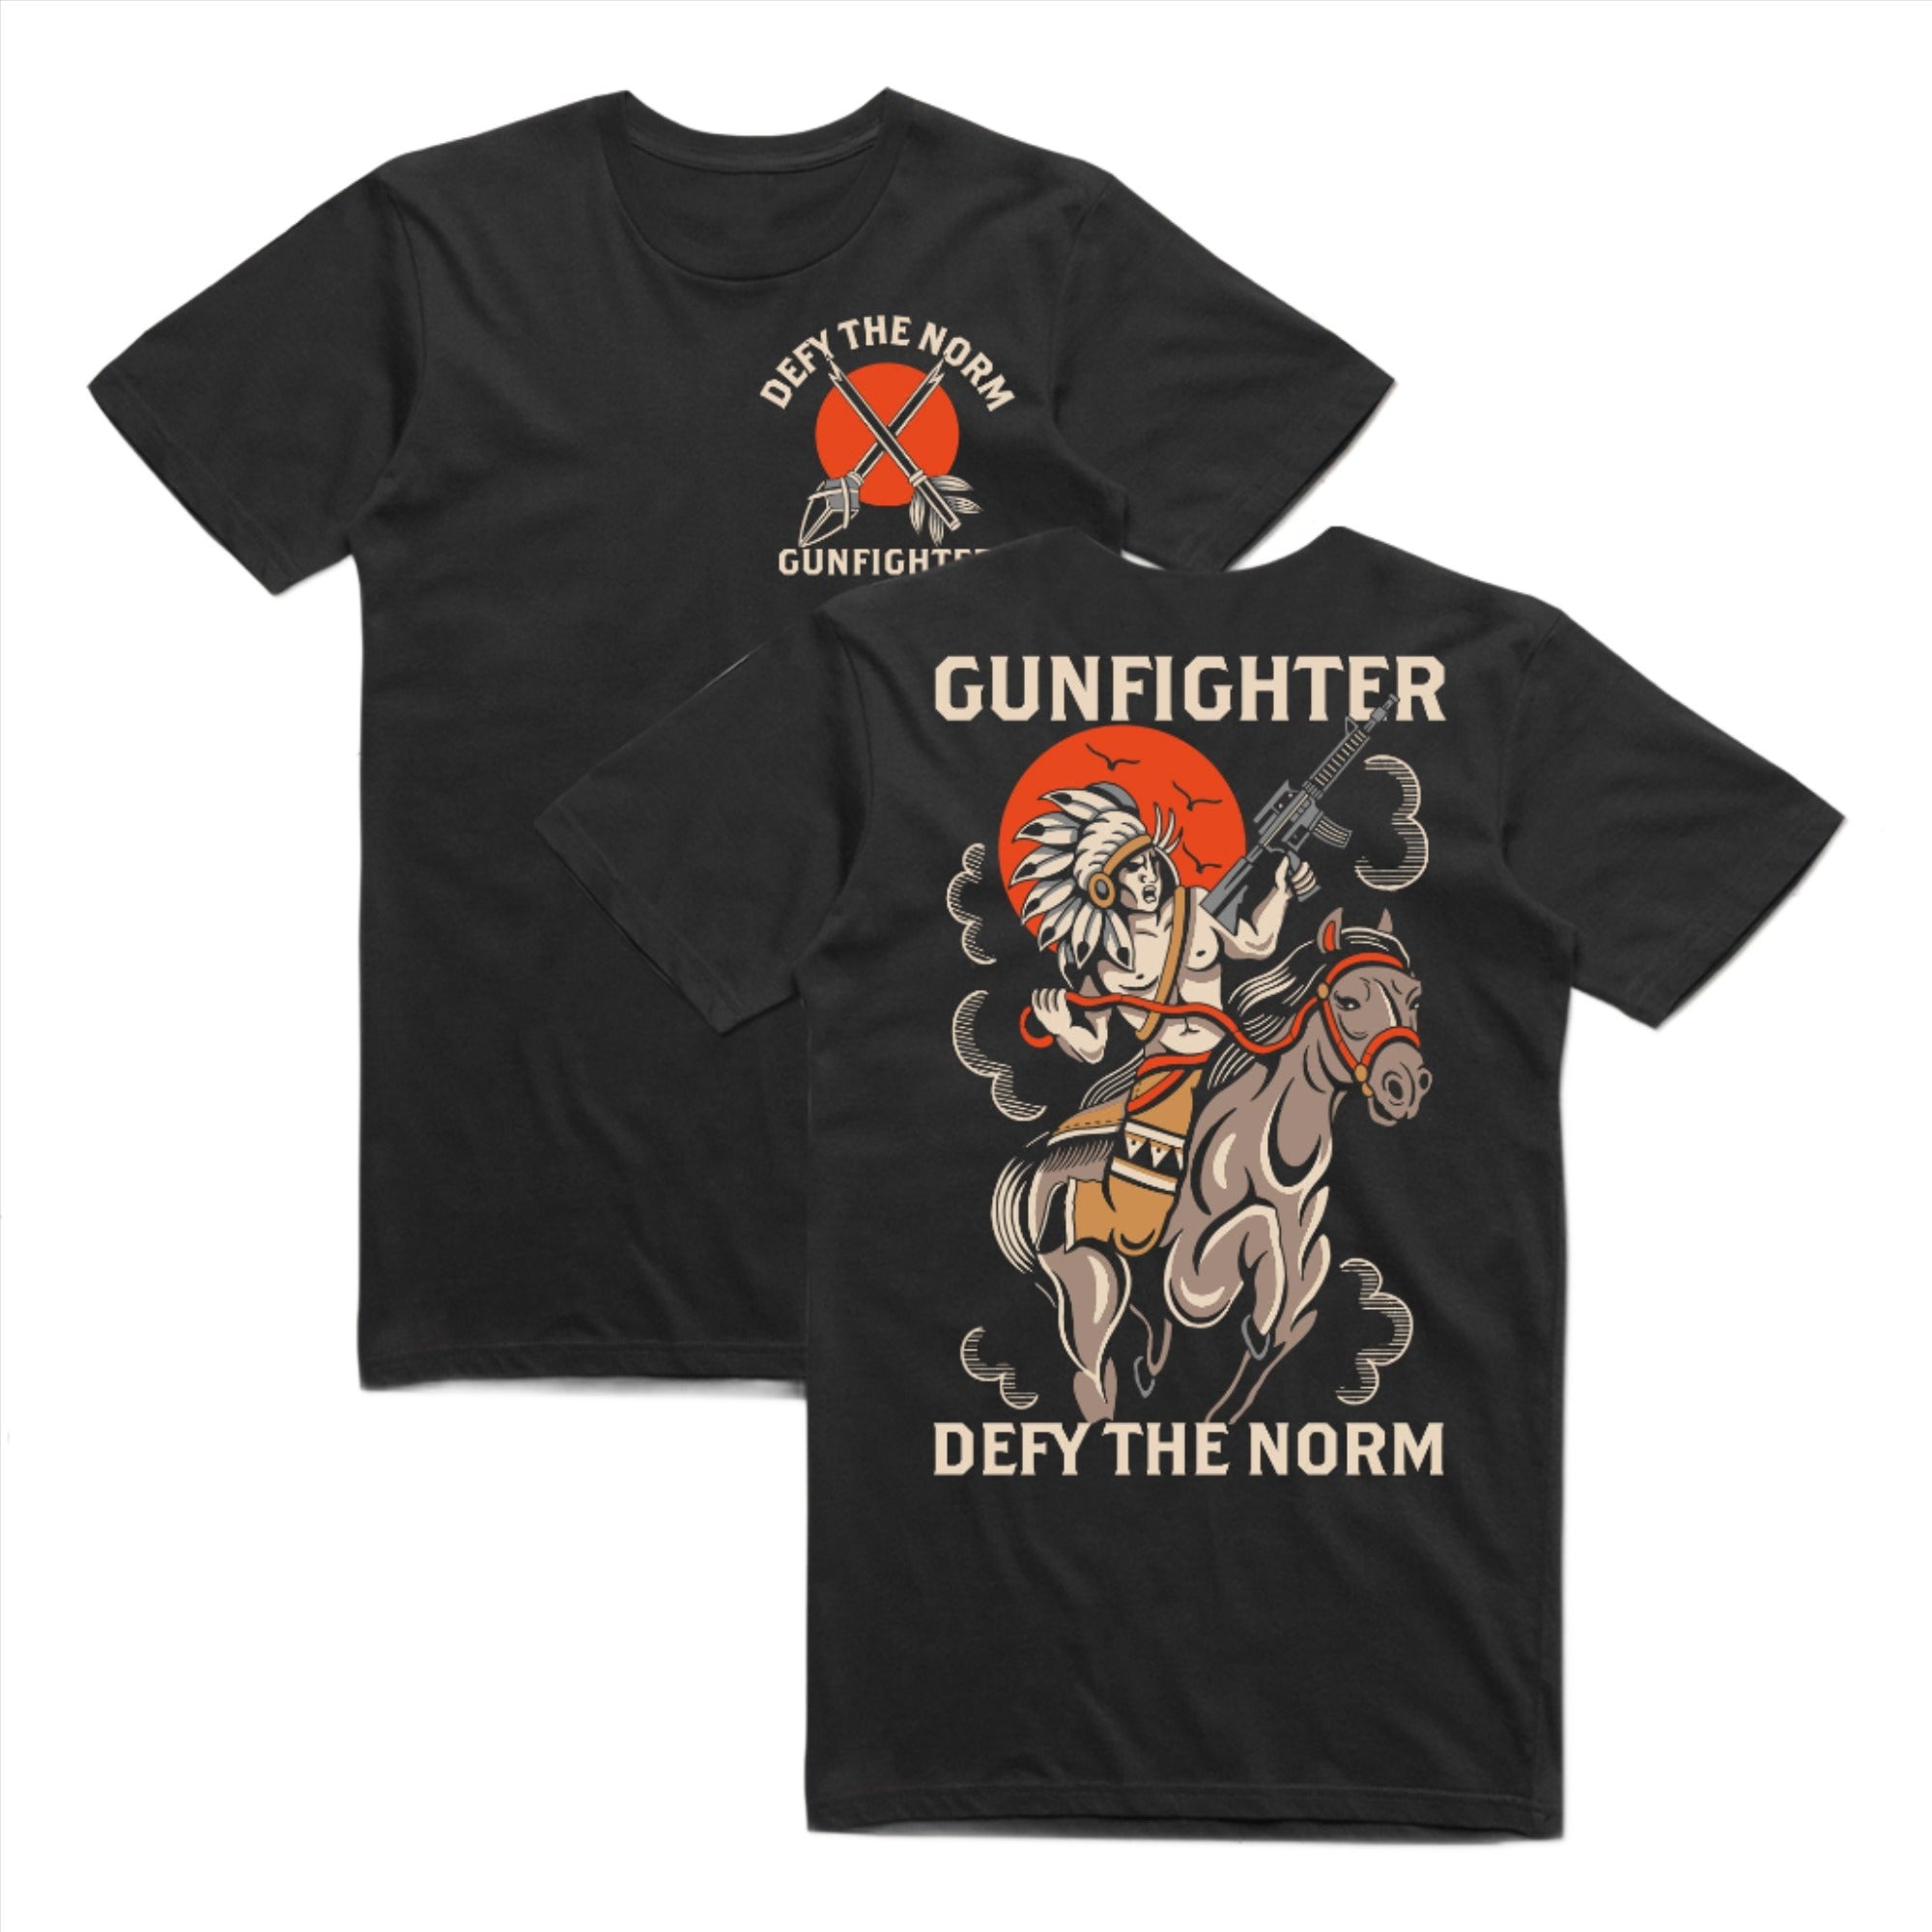 Gunfighter Tee + Raffle Entry For Ultimate Machinegun Experience